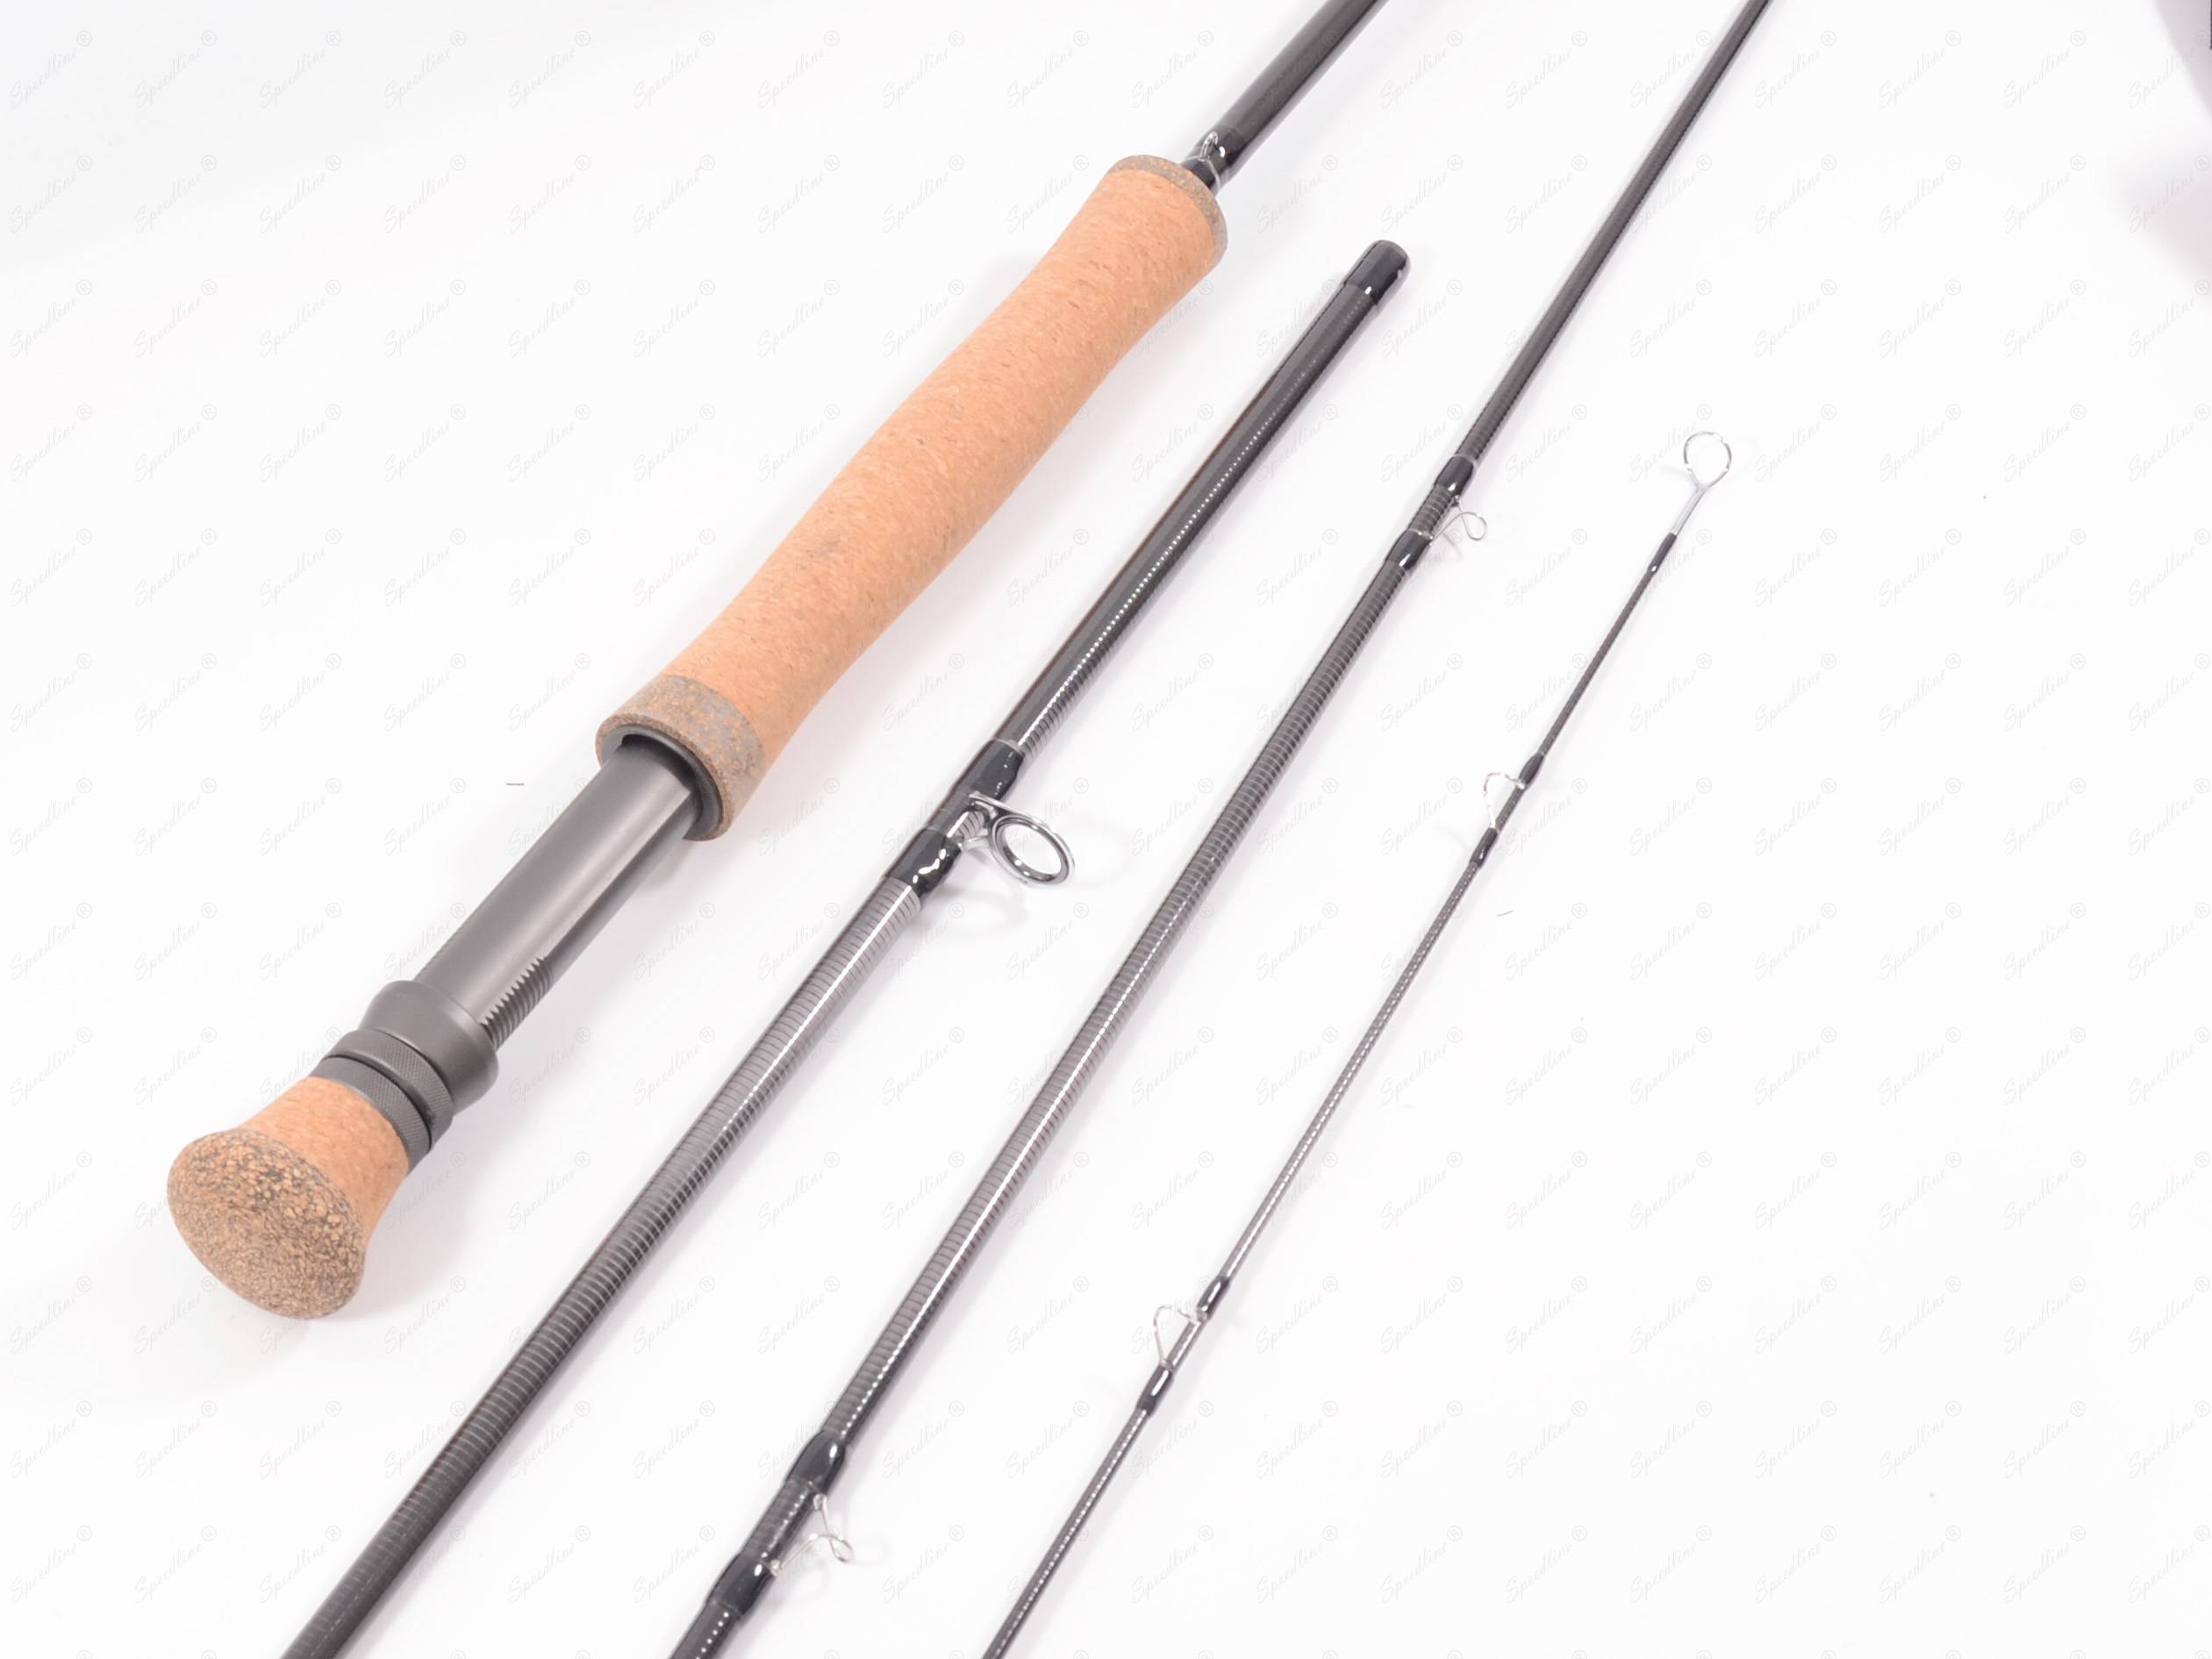 China New Product Fishing Rod Blank Carbon Fiber -
 River to Reef series – Huai An